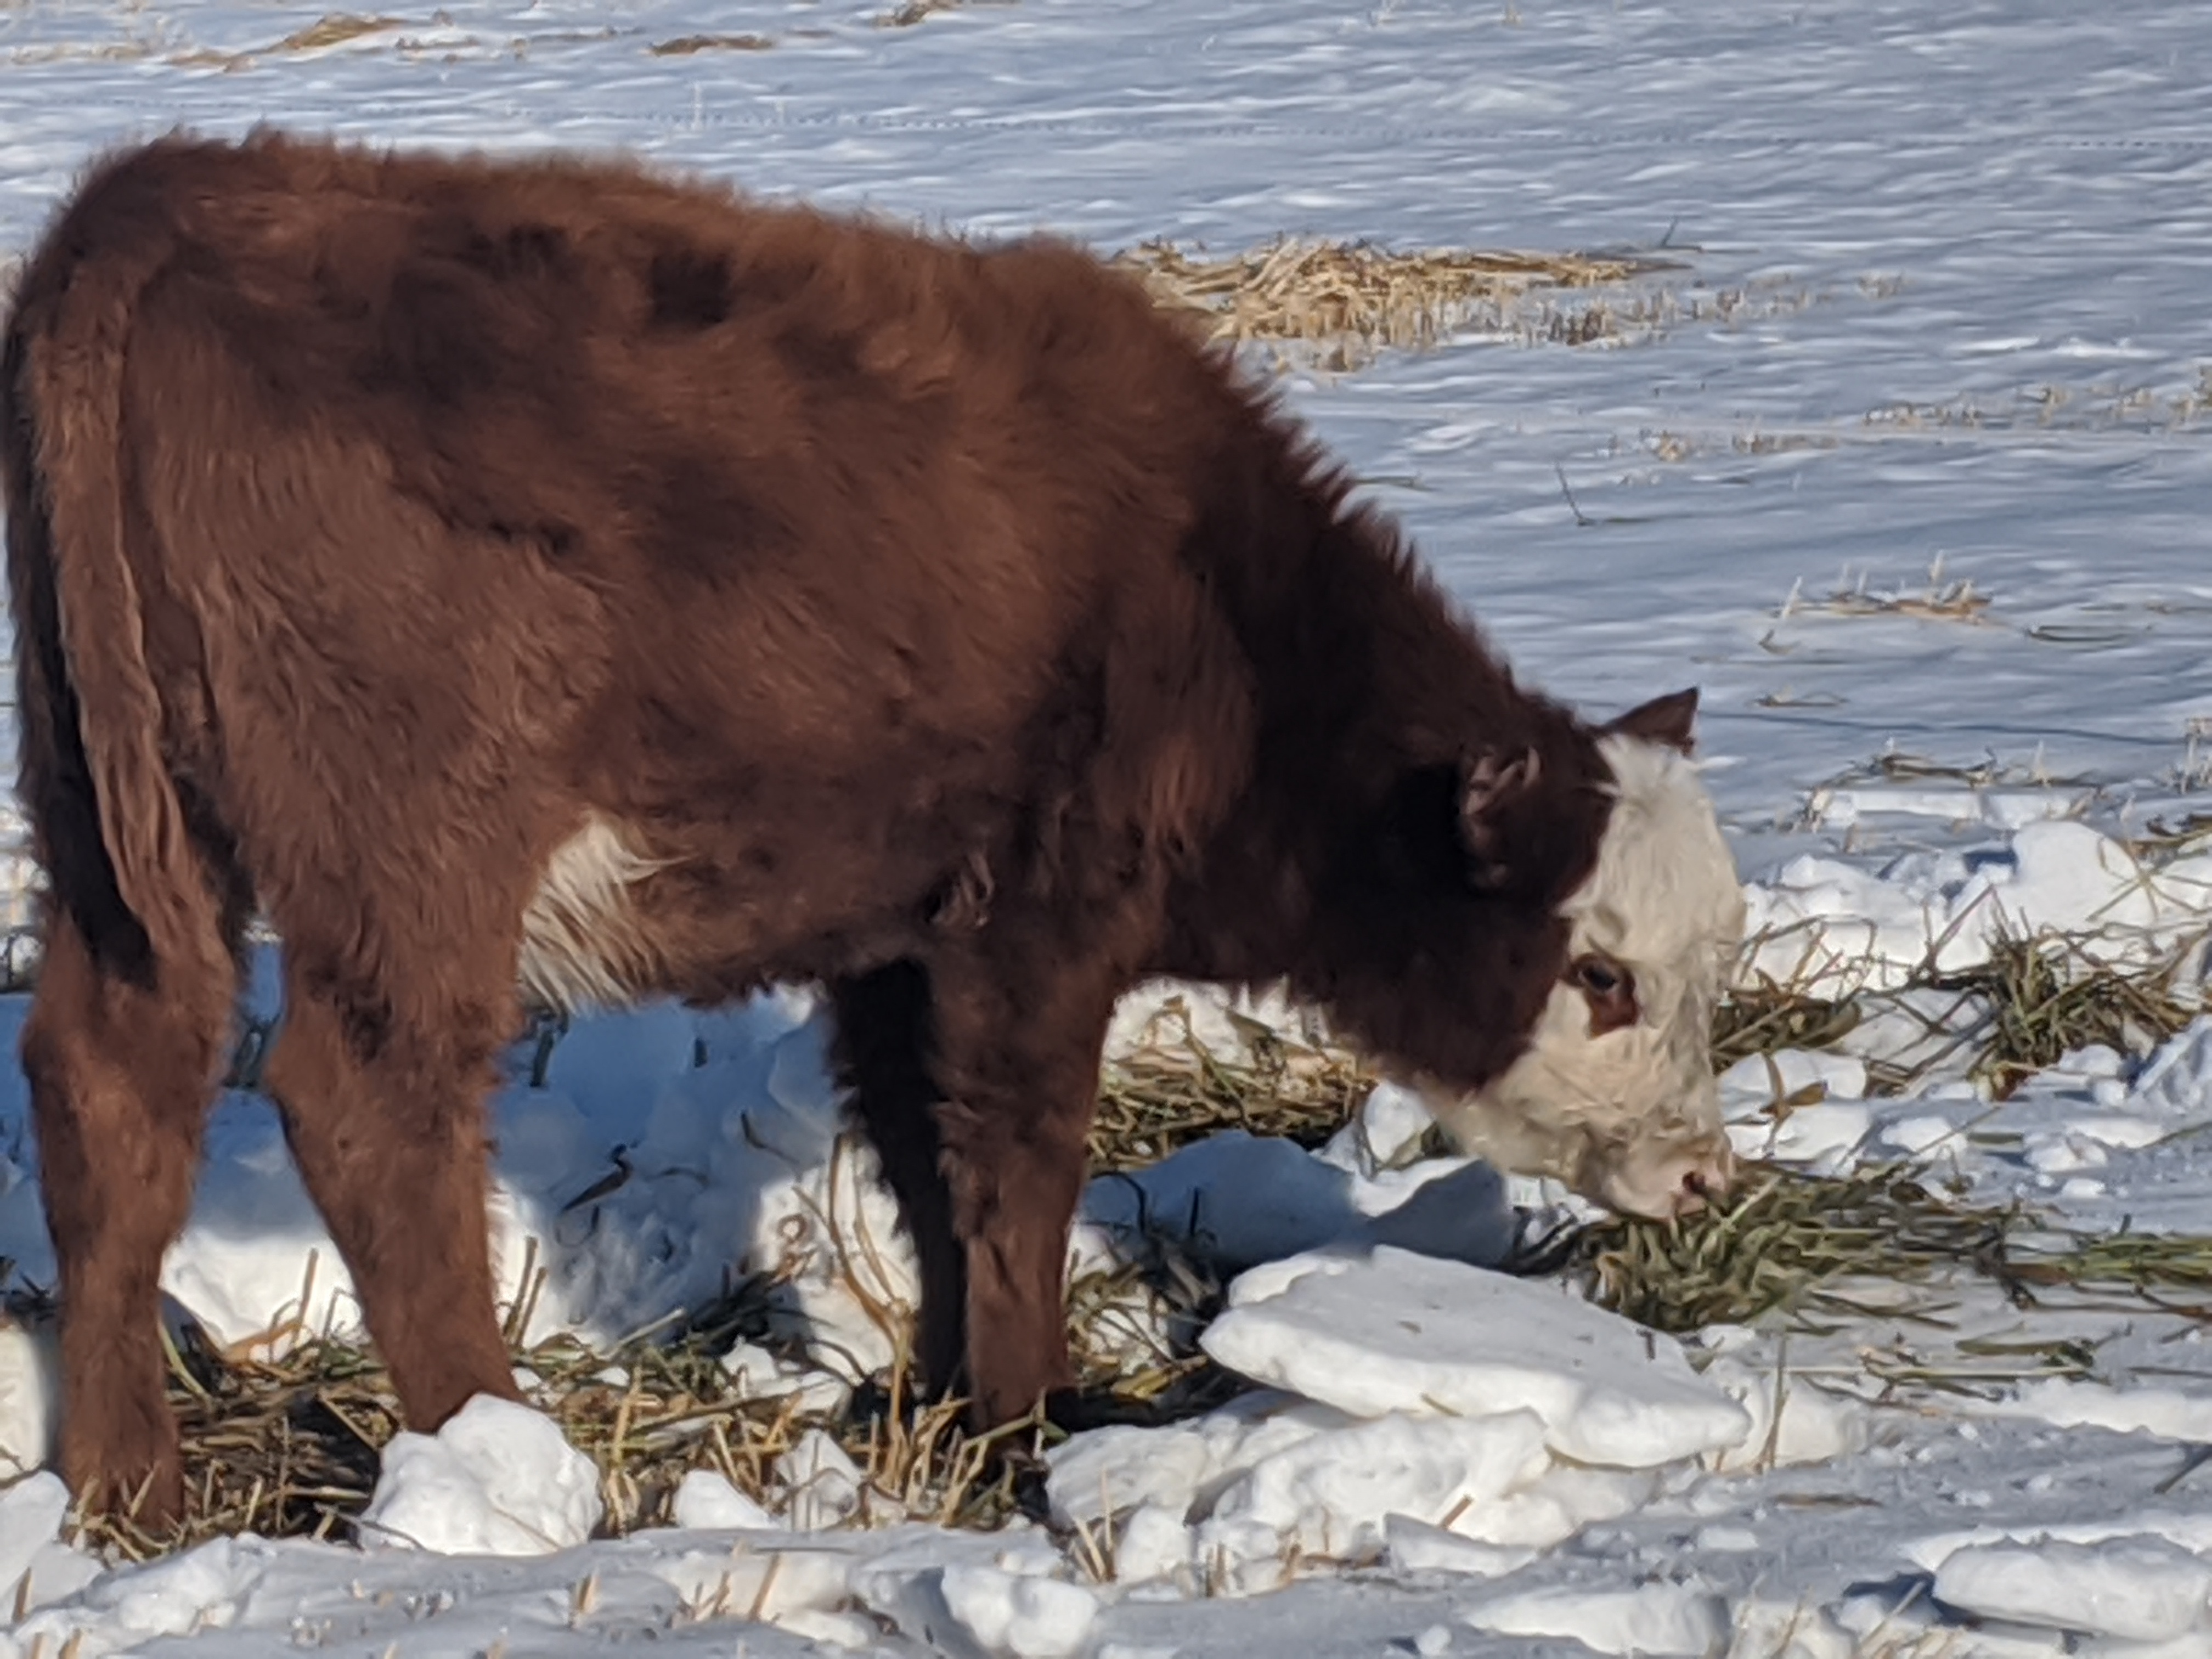 A reddish brown calf with a white face grazing in a snow covered pasture